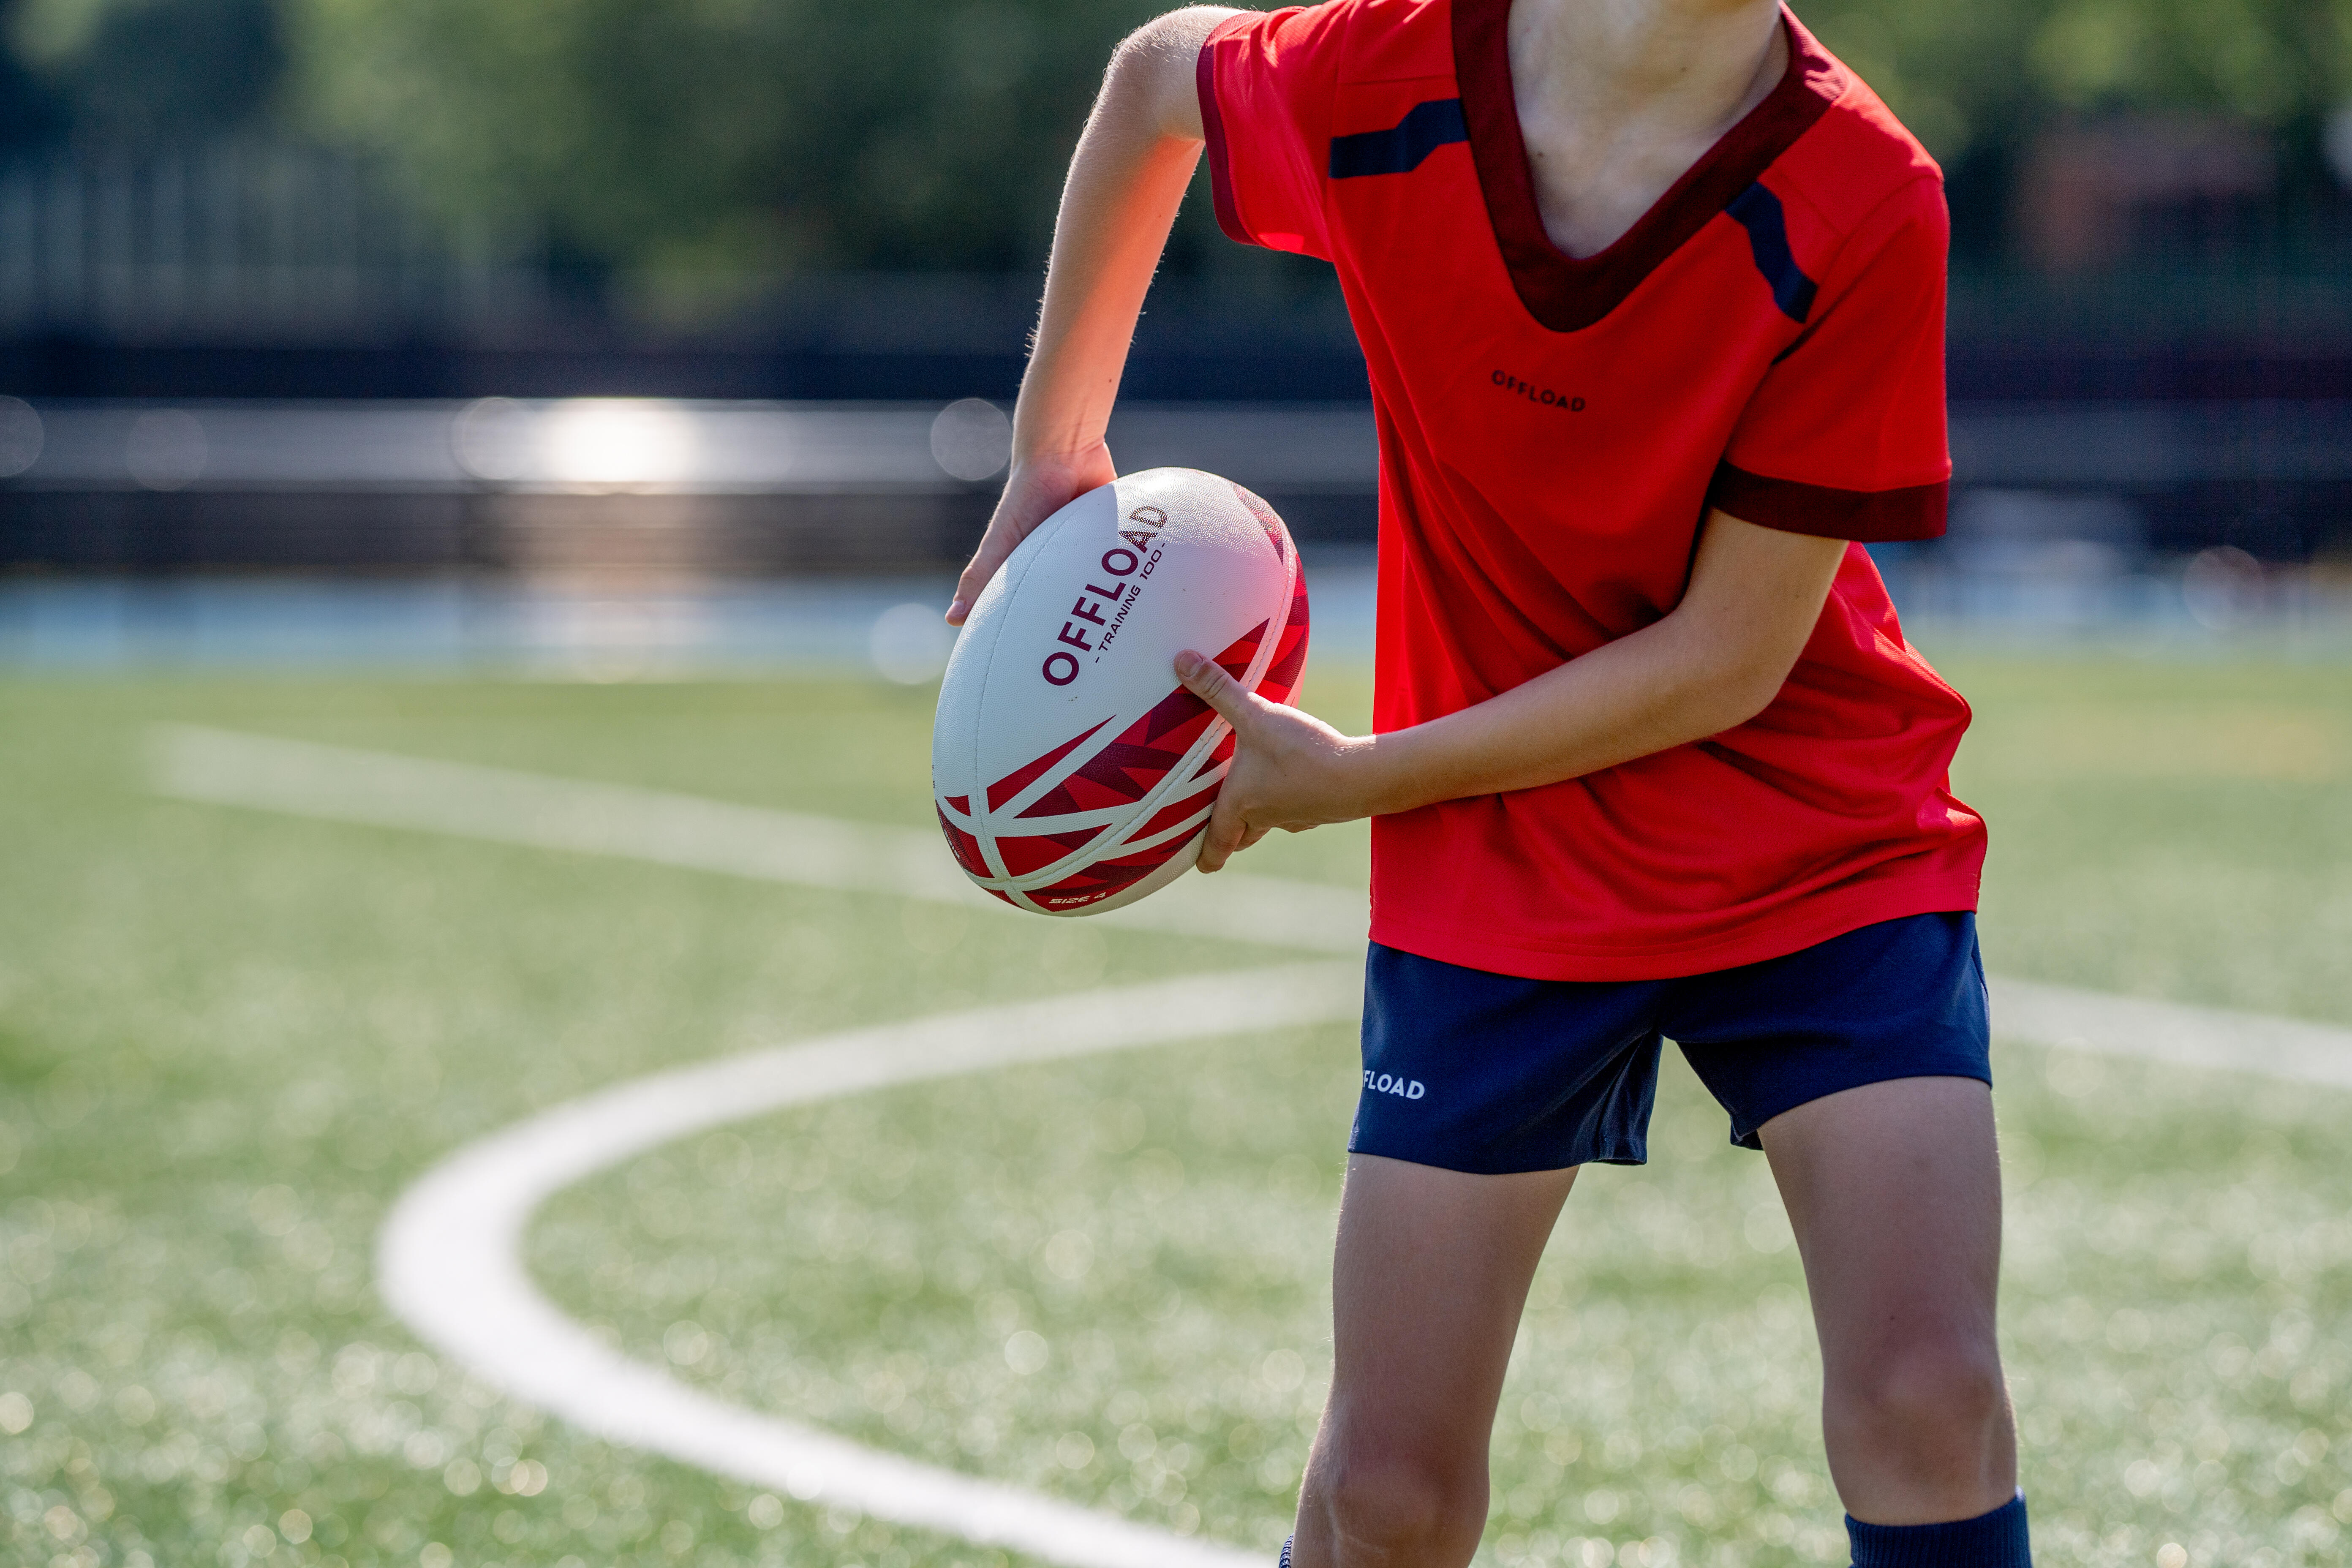 Kids' Size 4 Rugby Ball - 100 Red - OFFLOAD